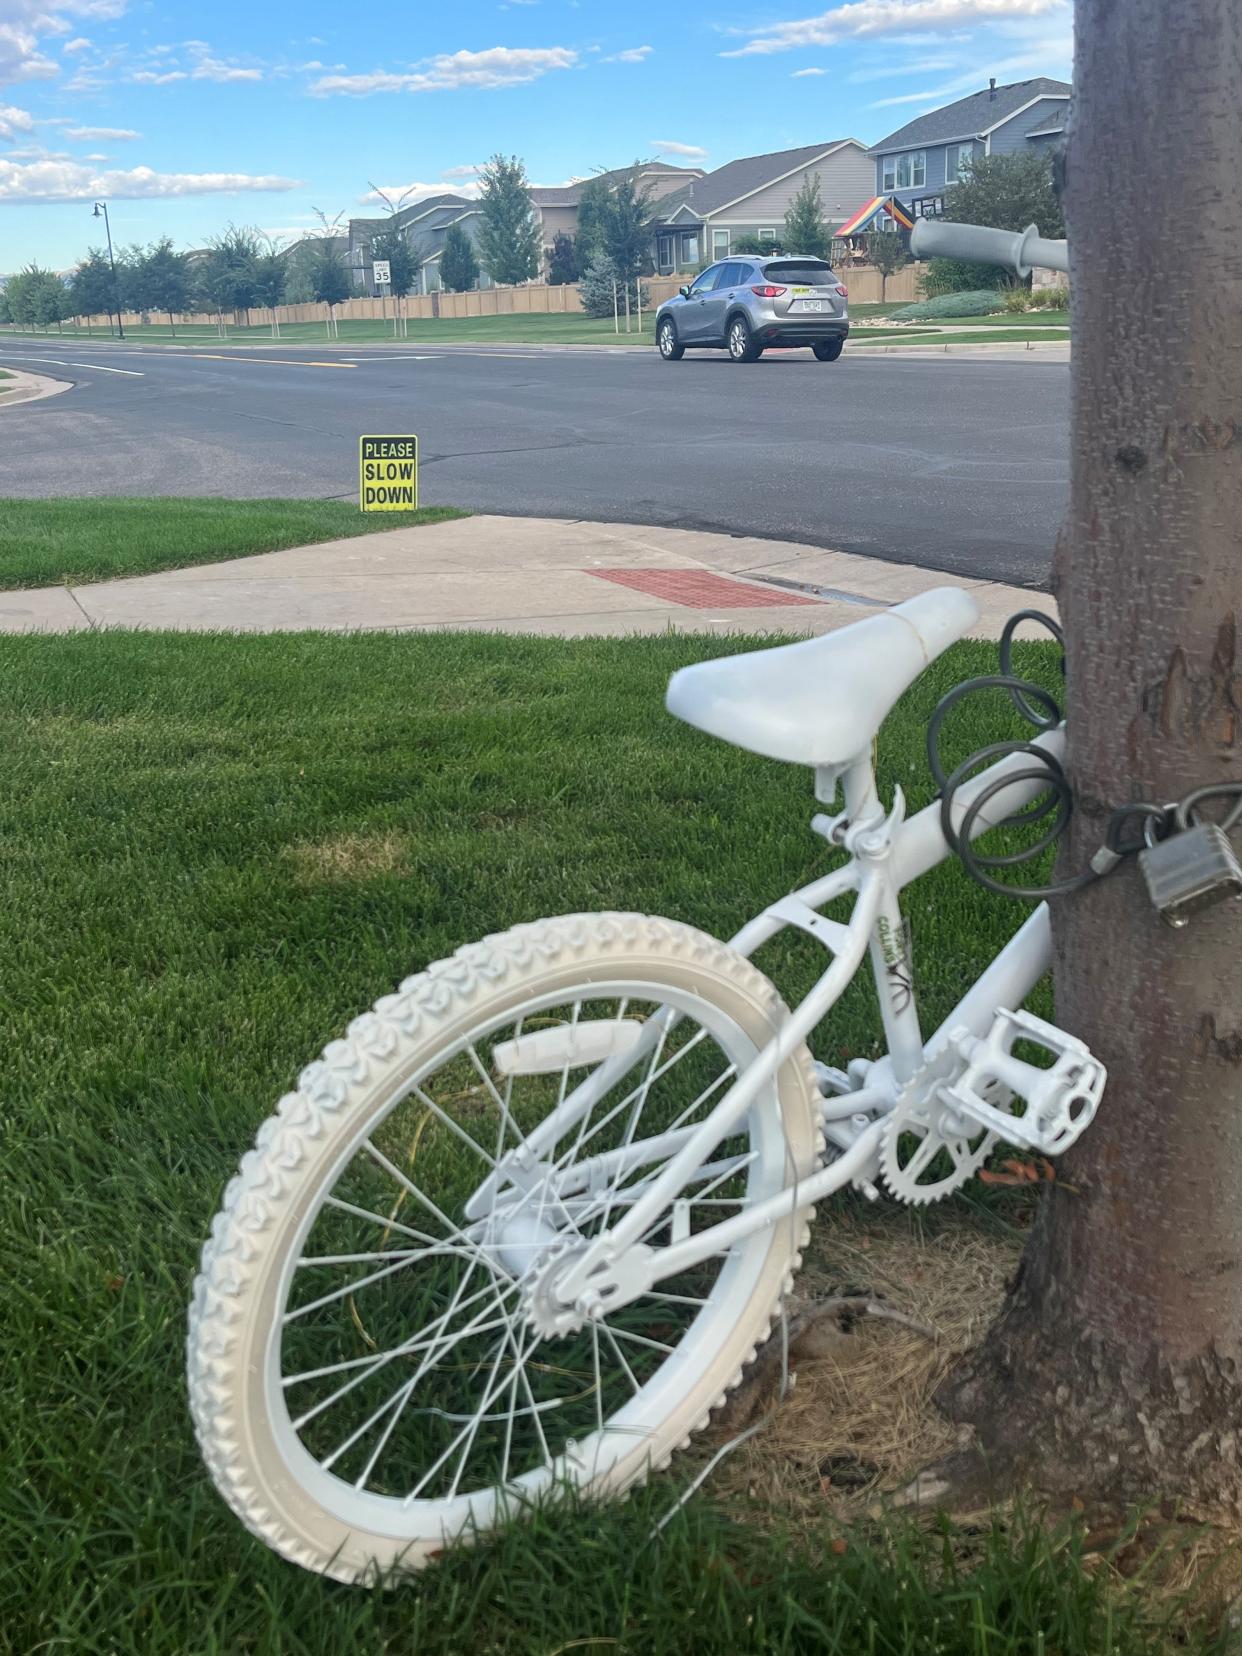 A ghost bike memorializes where 10-year-old Oliver Stratton was killed Aug. 2, when his bike and a vehicle collided in Timnath. A new speed limit sign in the background shows a reduced speed of 35 mph along River Pass Road.